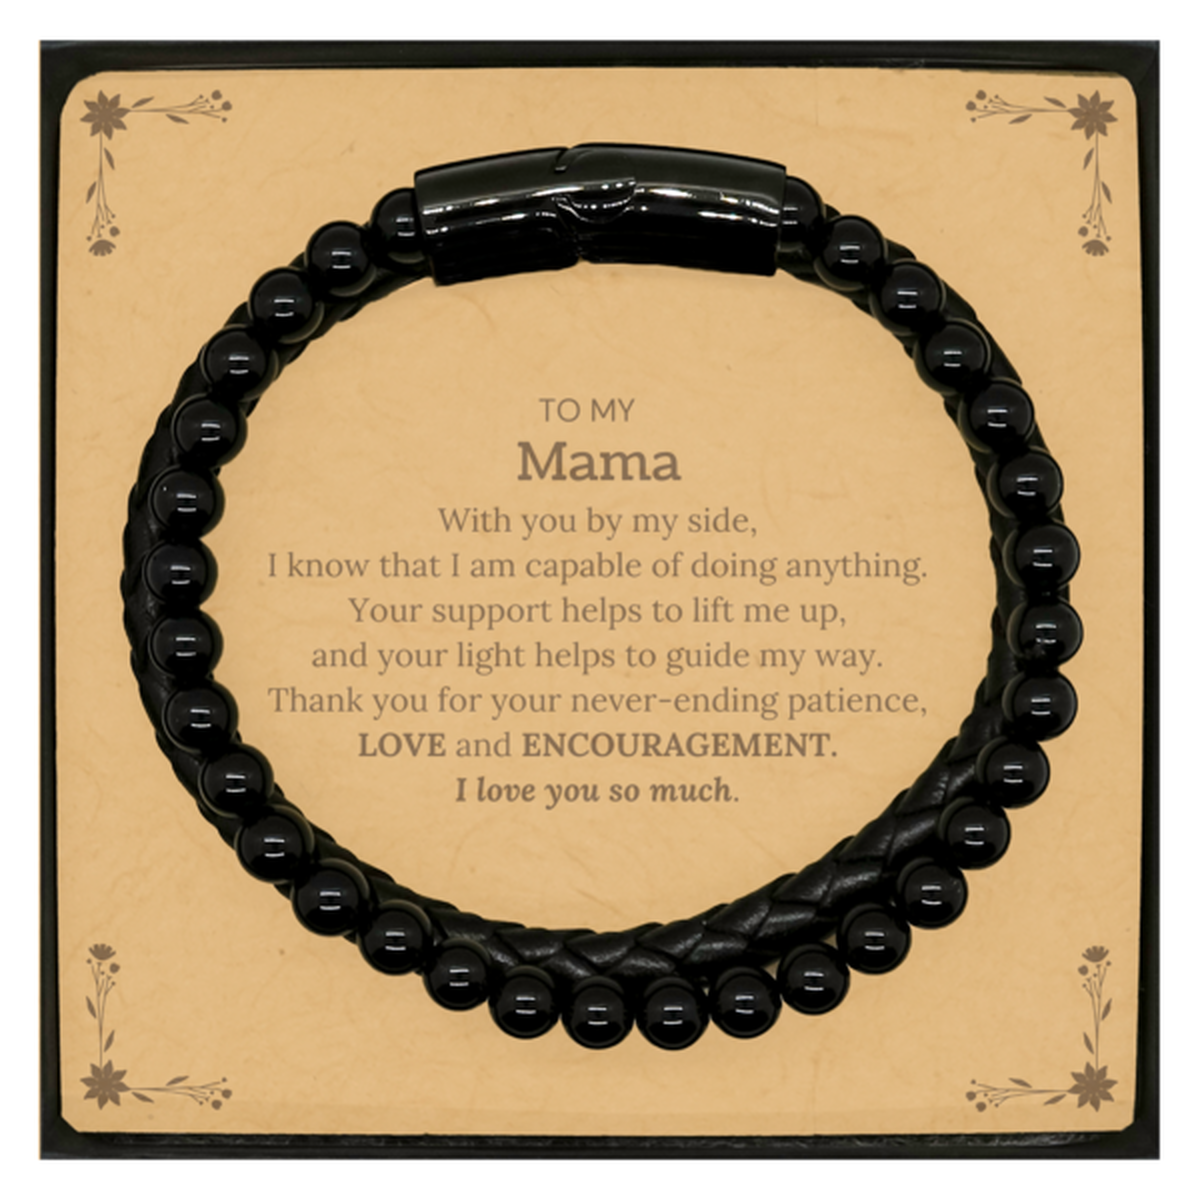 Appreciation Mama Stone Leather Bracelets Gifts, To My Mama Birthday Christmas Wedding Keepsake Gifts for Mama With you by my side, I know that I am capable of doing anything. I love you so much